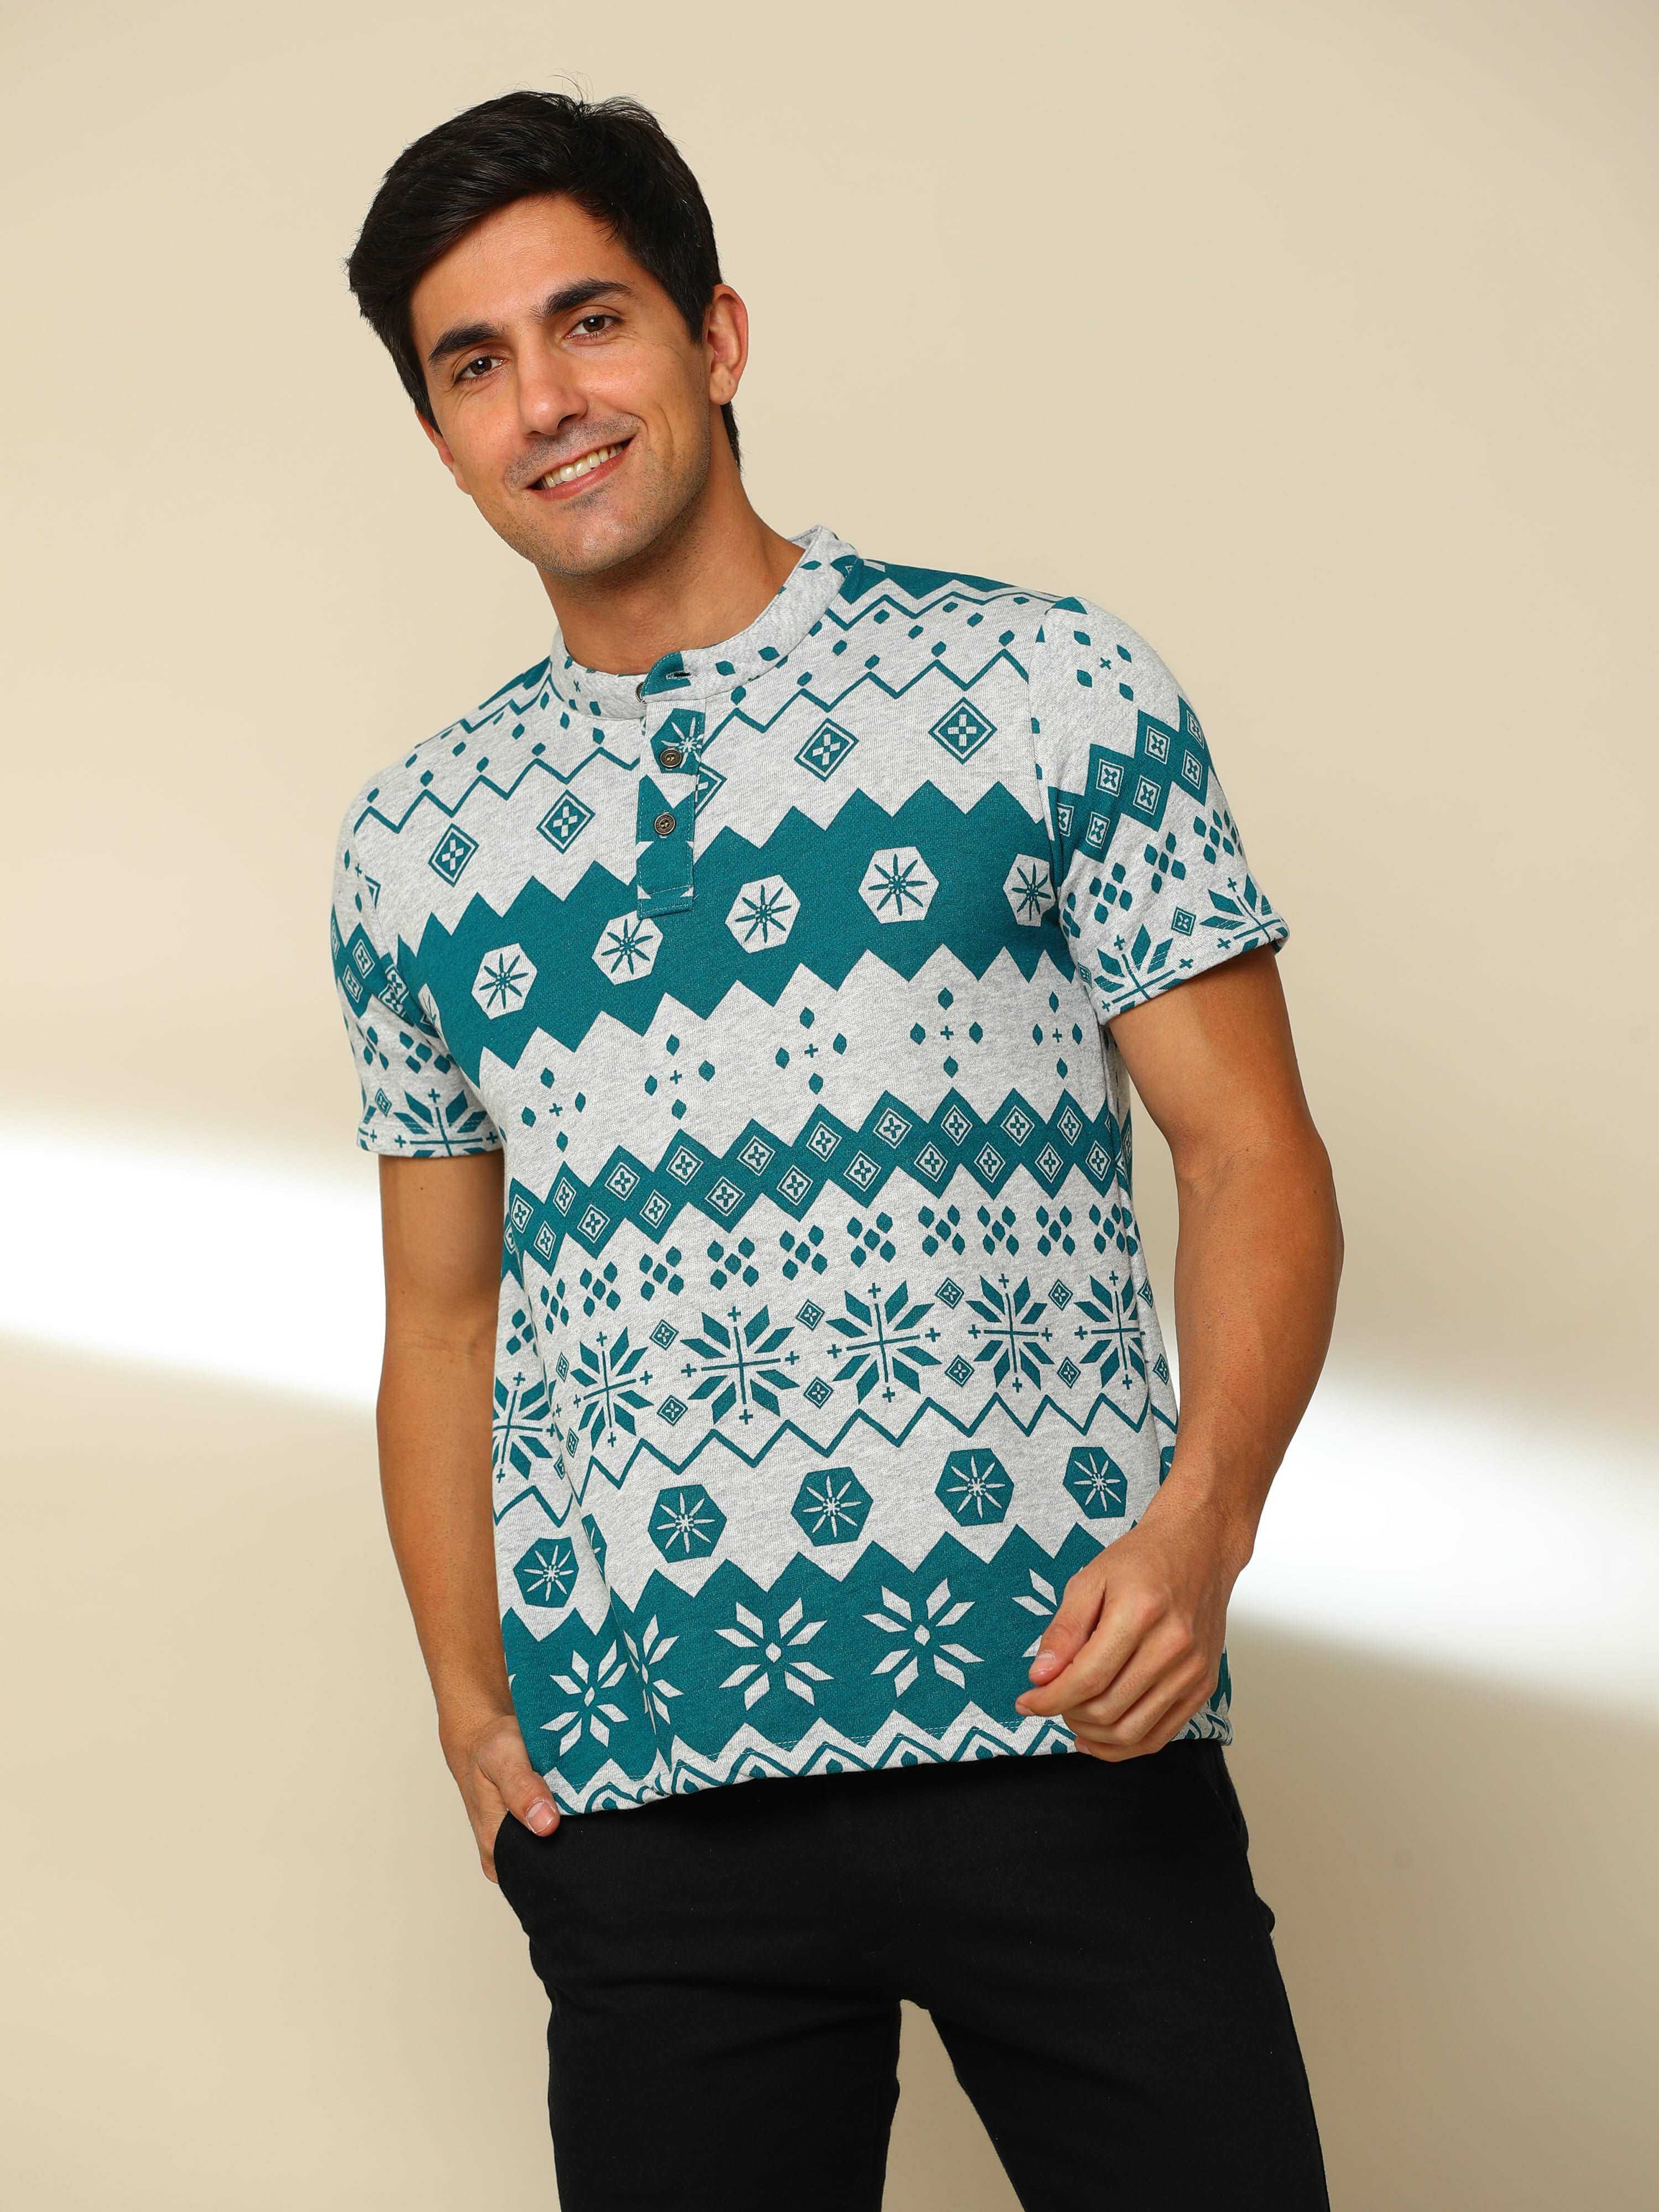 Cambric Henley Neck Printed T Shirt shop online at Estilocus. 100% Cotton Designed and printed on knitted fabric. The fabric is stretchy and lightweight, with a soft skin feel and no wrinkles. The Henley collar is smooth on the neck and keeps you comforta